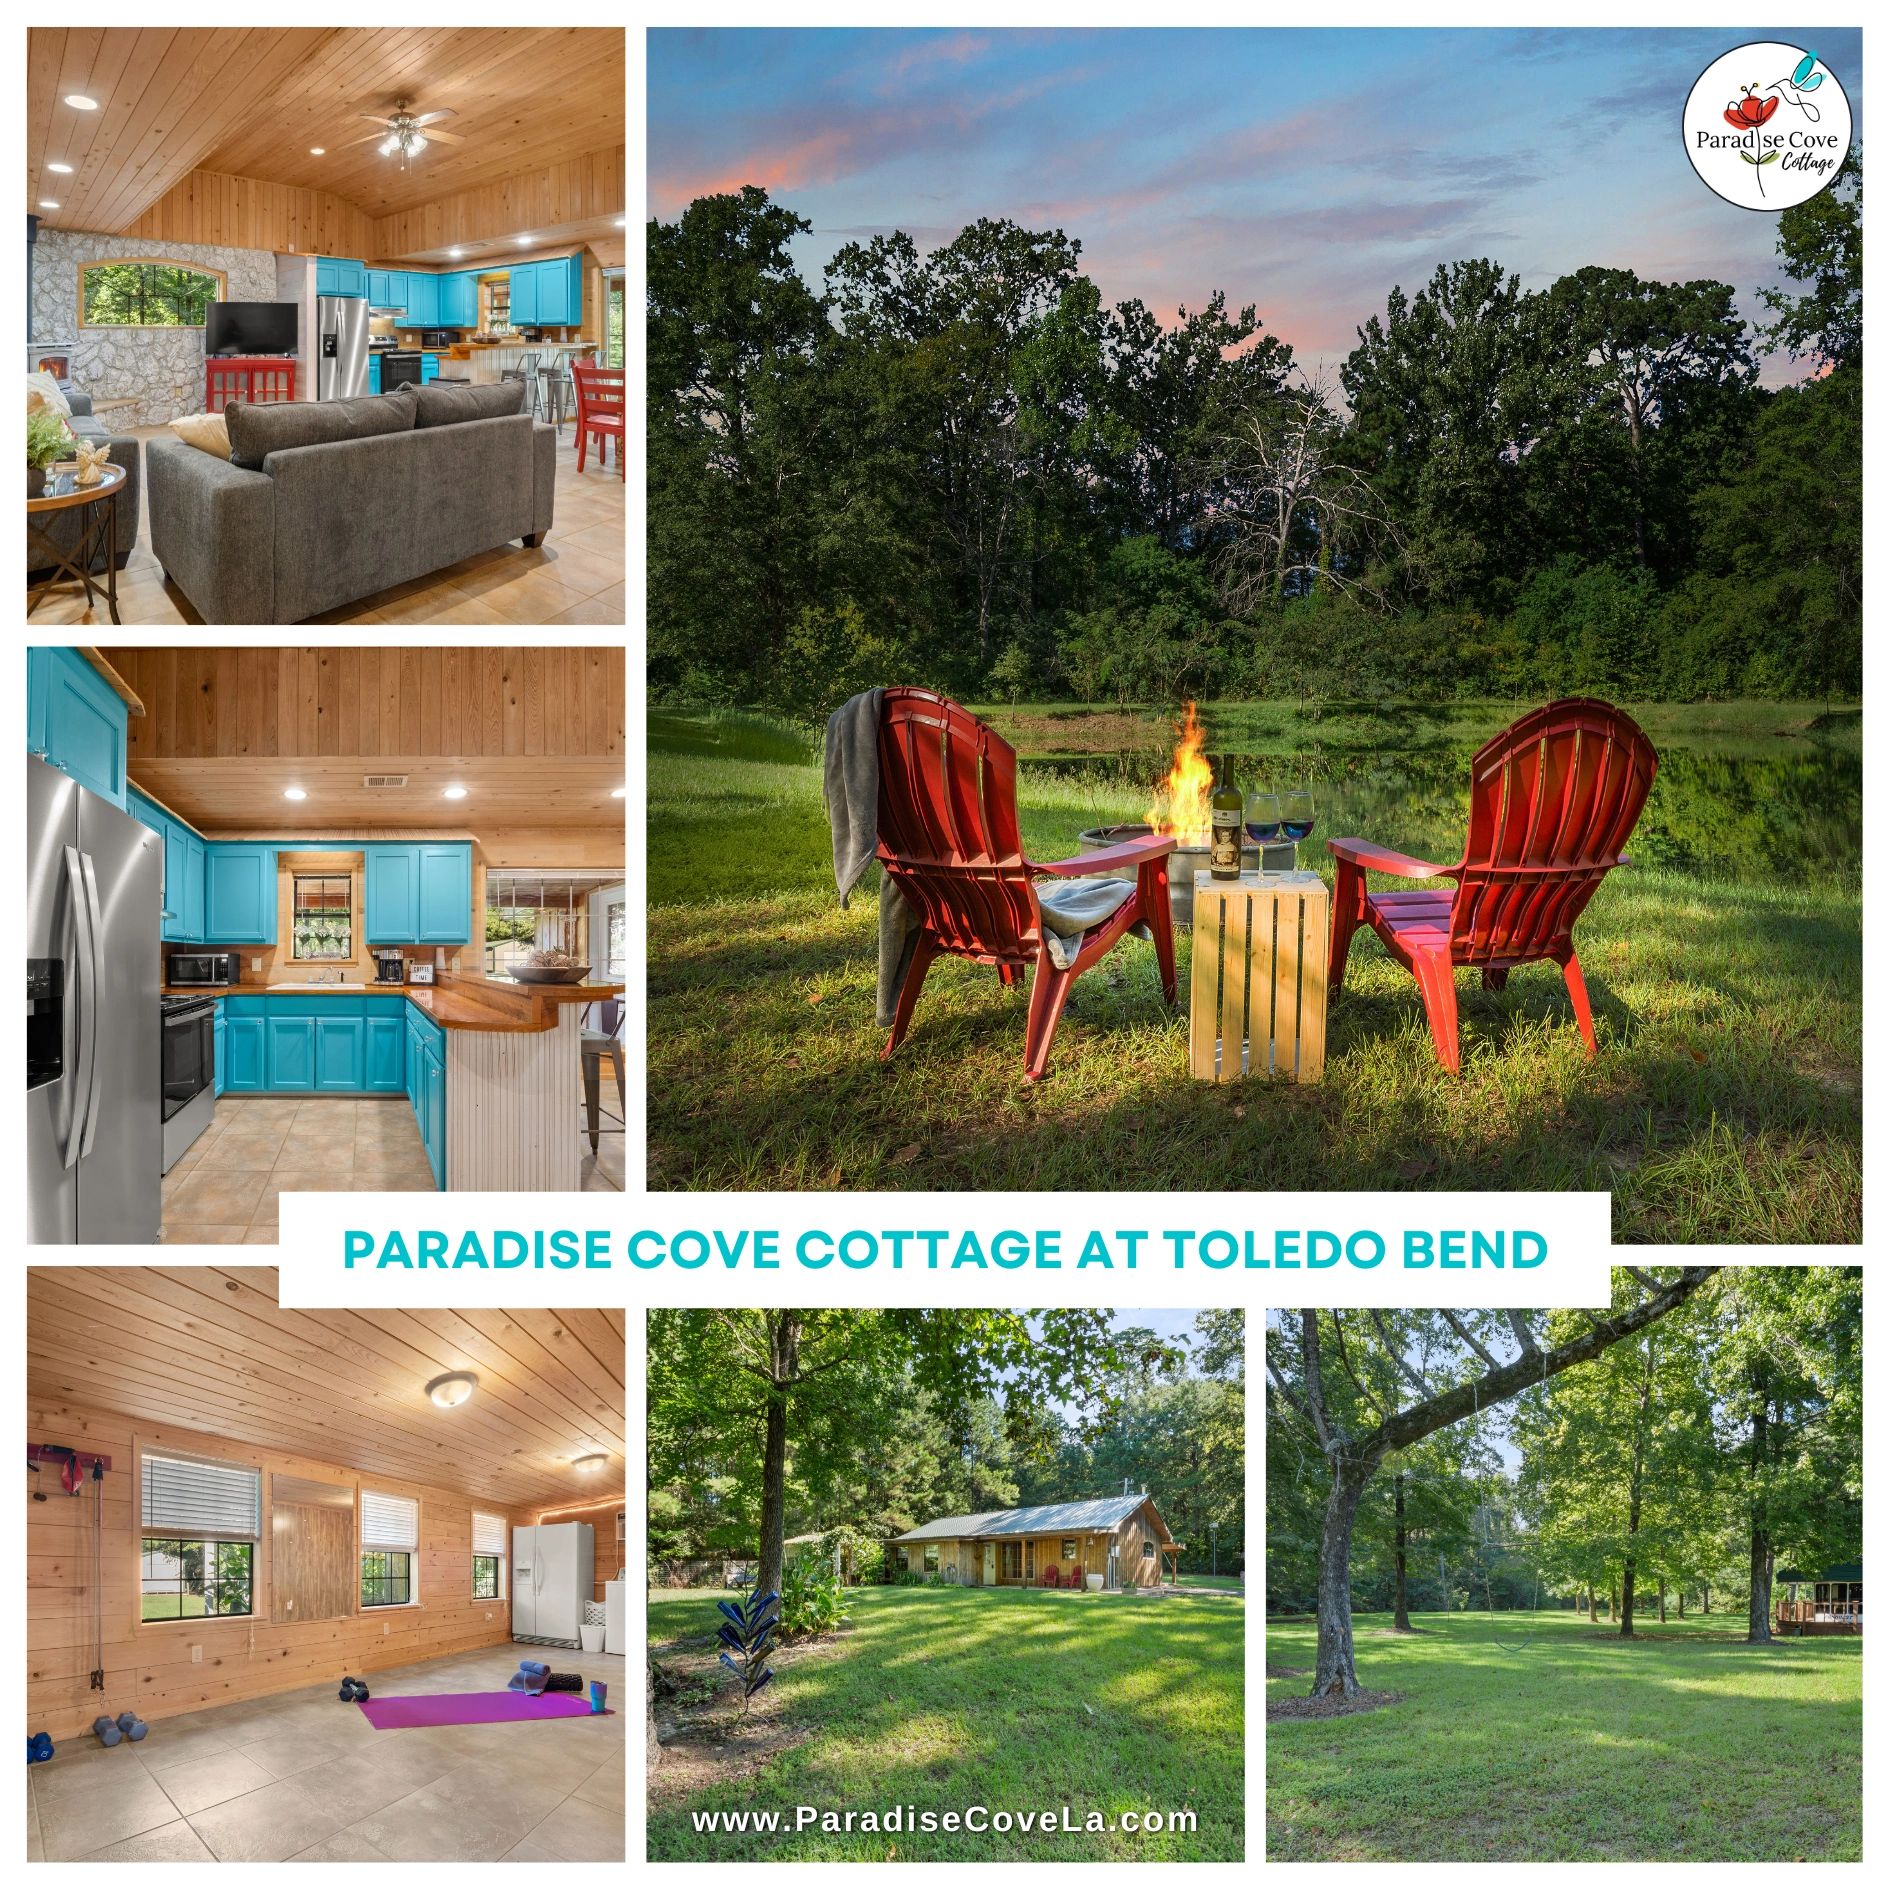 Paradise Cove is just that, pure paradise!!  Situated on three secluded acres with a tranquil pond, 